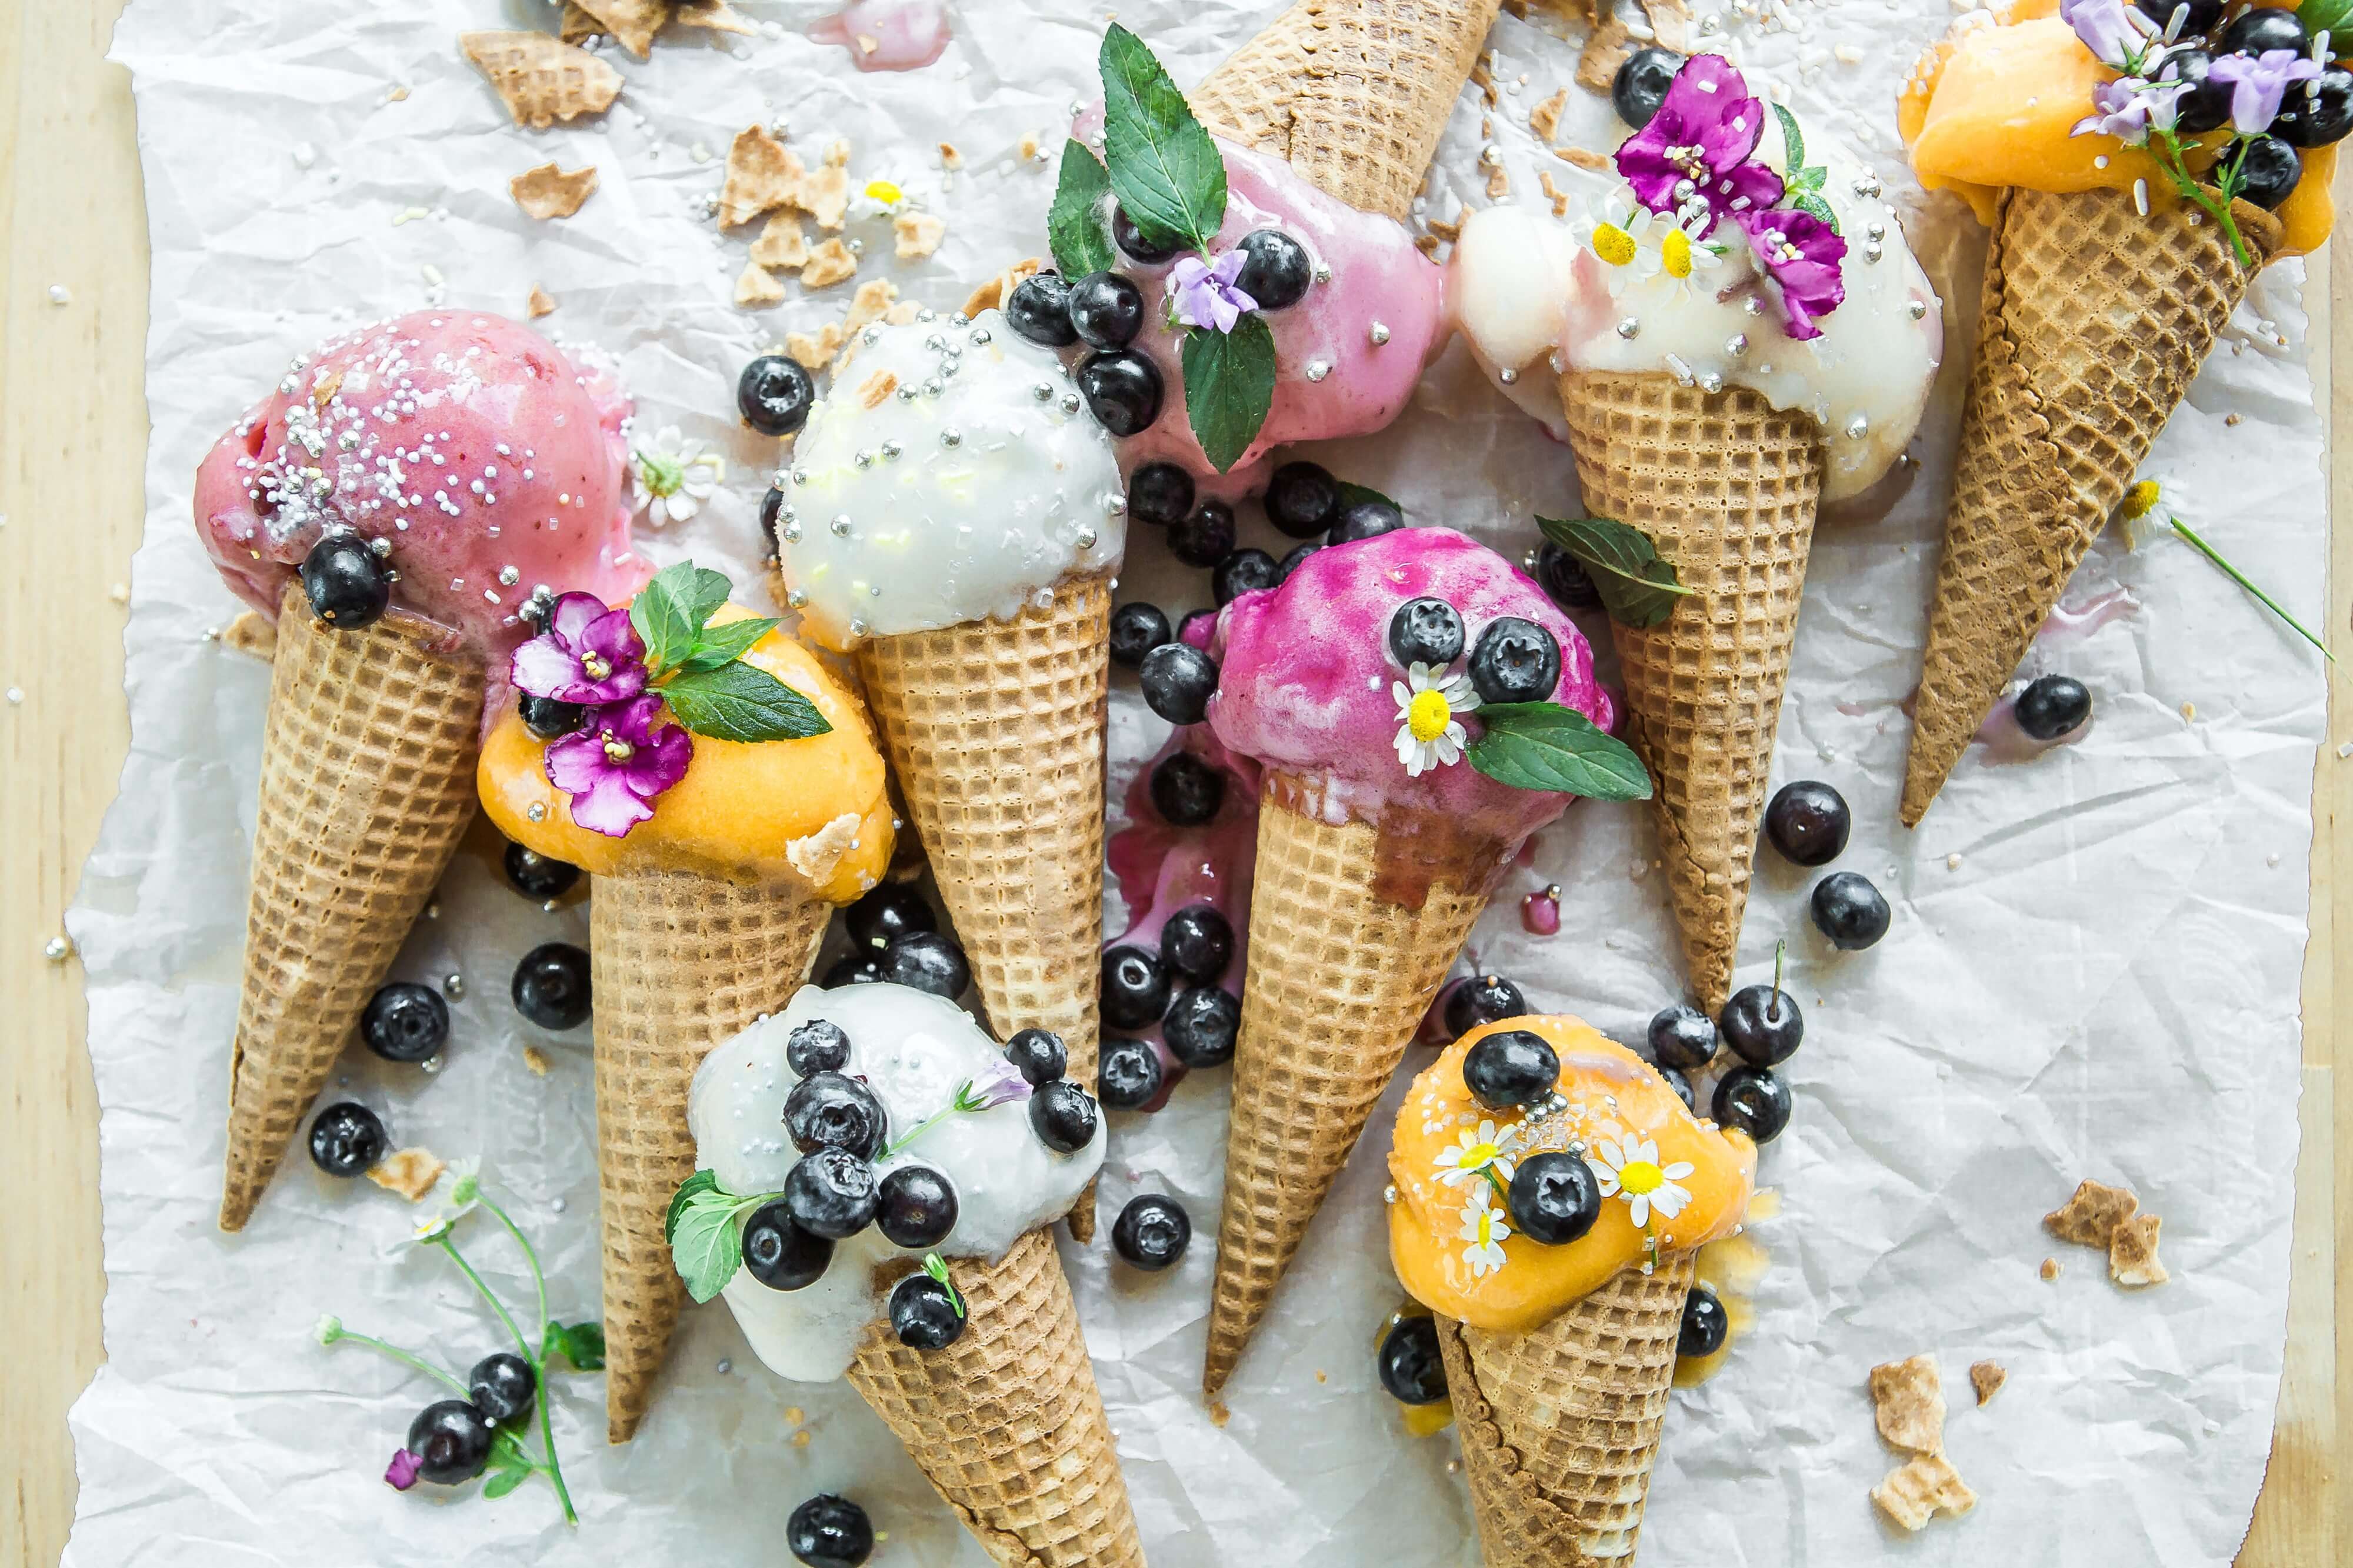 multiple ice cream cones with multiple flavors, colors and berries all around them